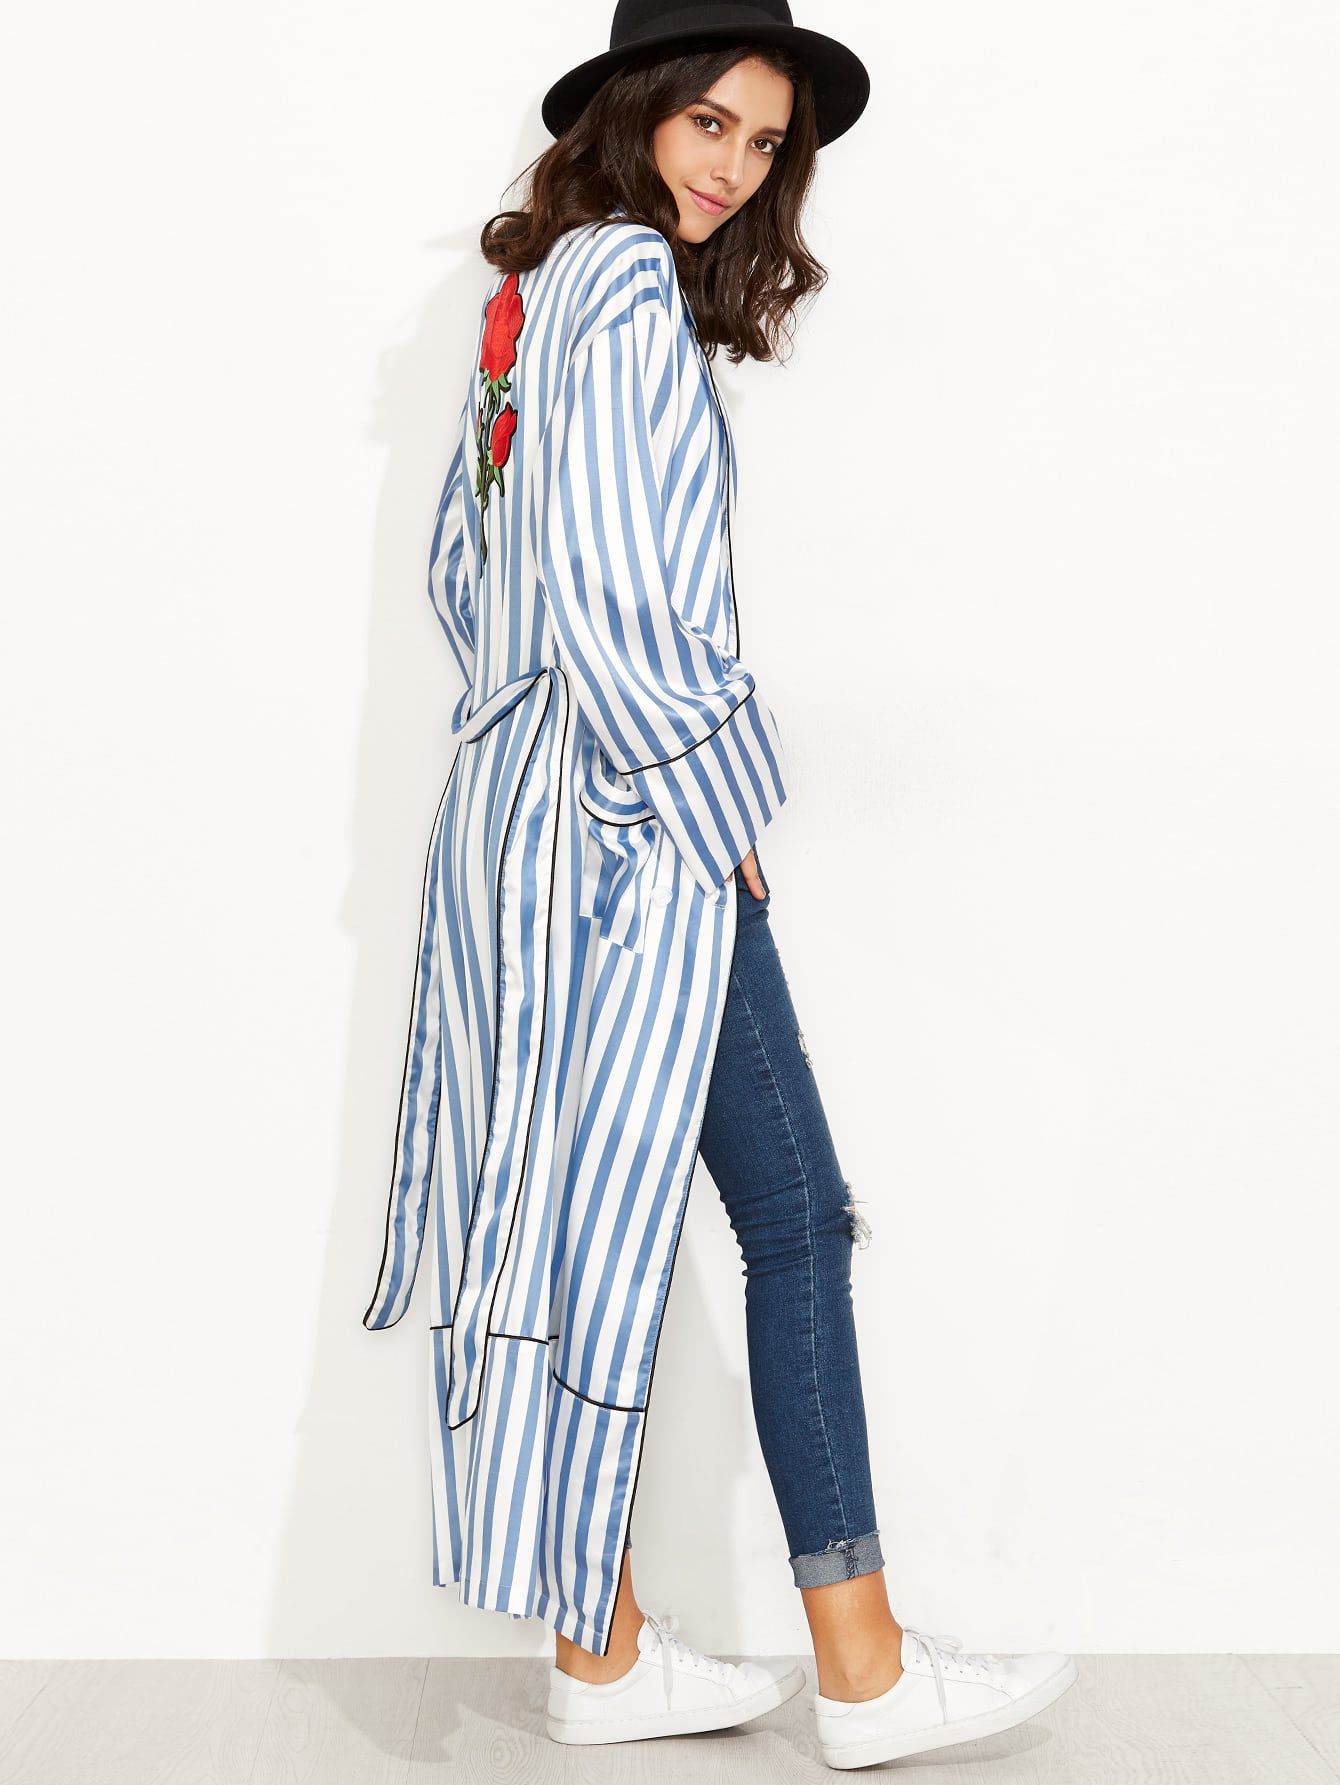 Blue and White Striped Rose Embroidered Tie Waist Outerwear | SHEIN